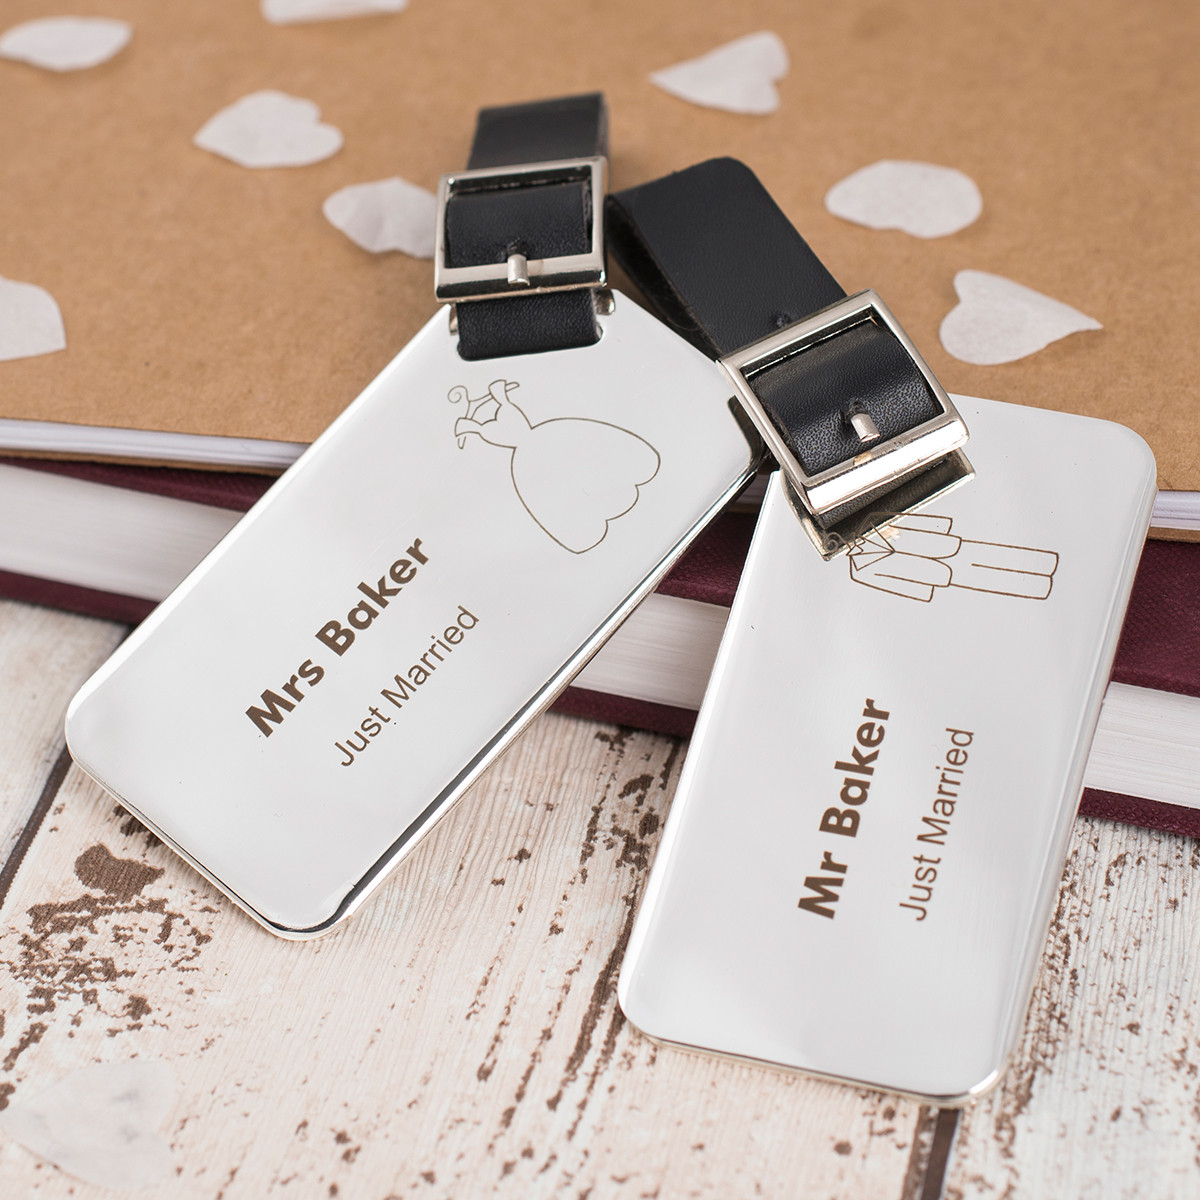 Gift Ideas For A Married Couple
 Wedding Gift Ideas For Couples Who Have Everything